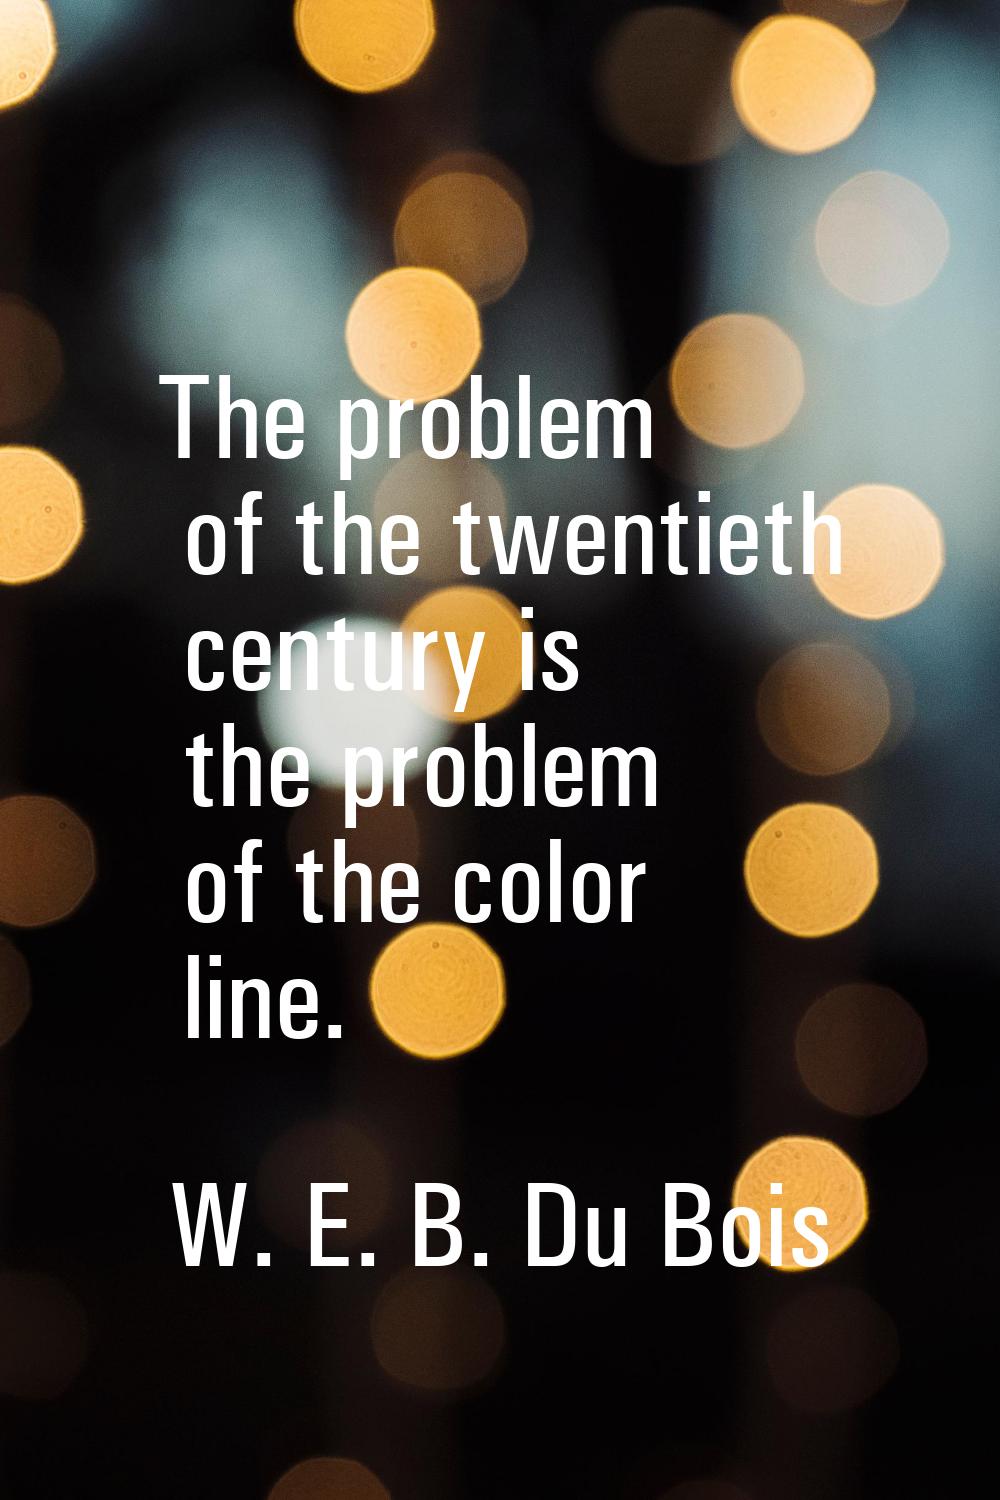 The problem of the twentieth century is the problem of the color line.